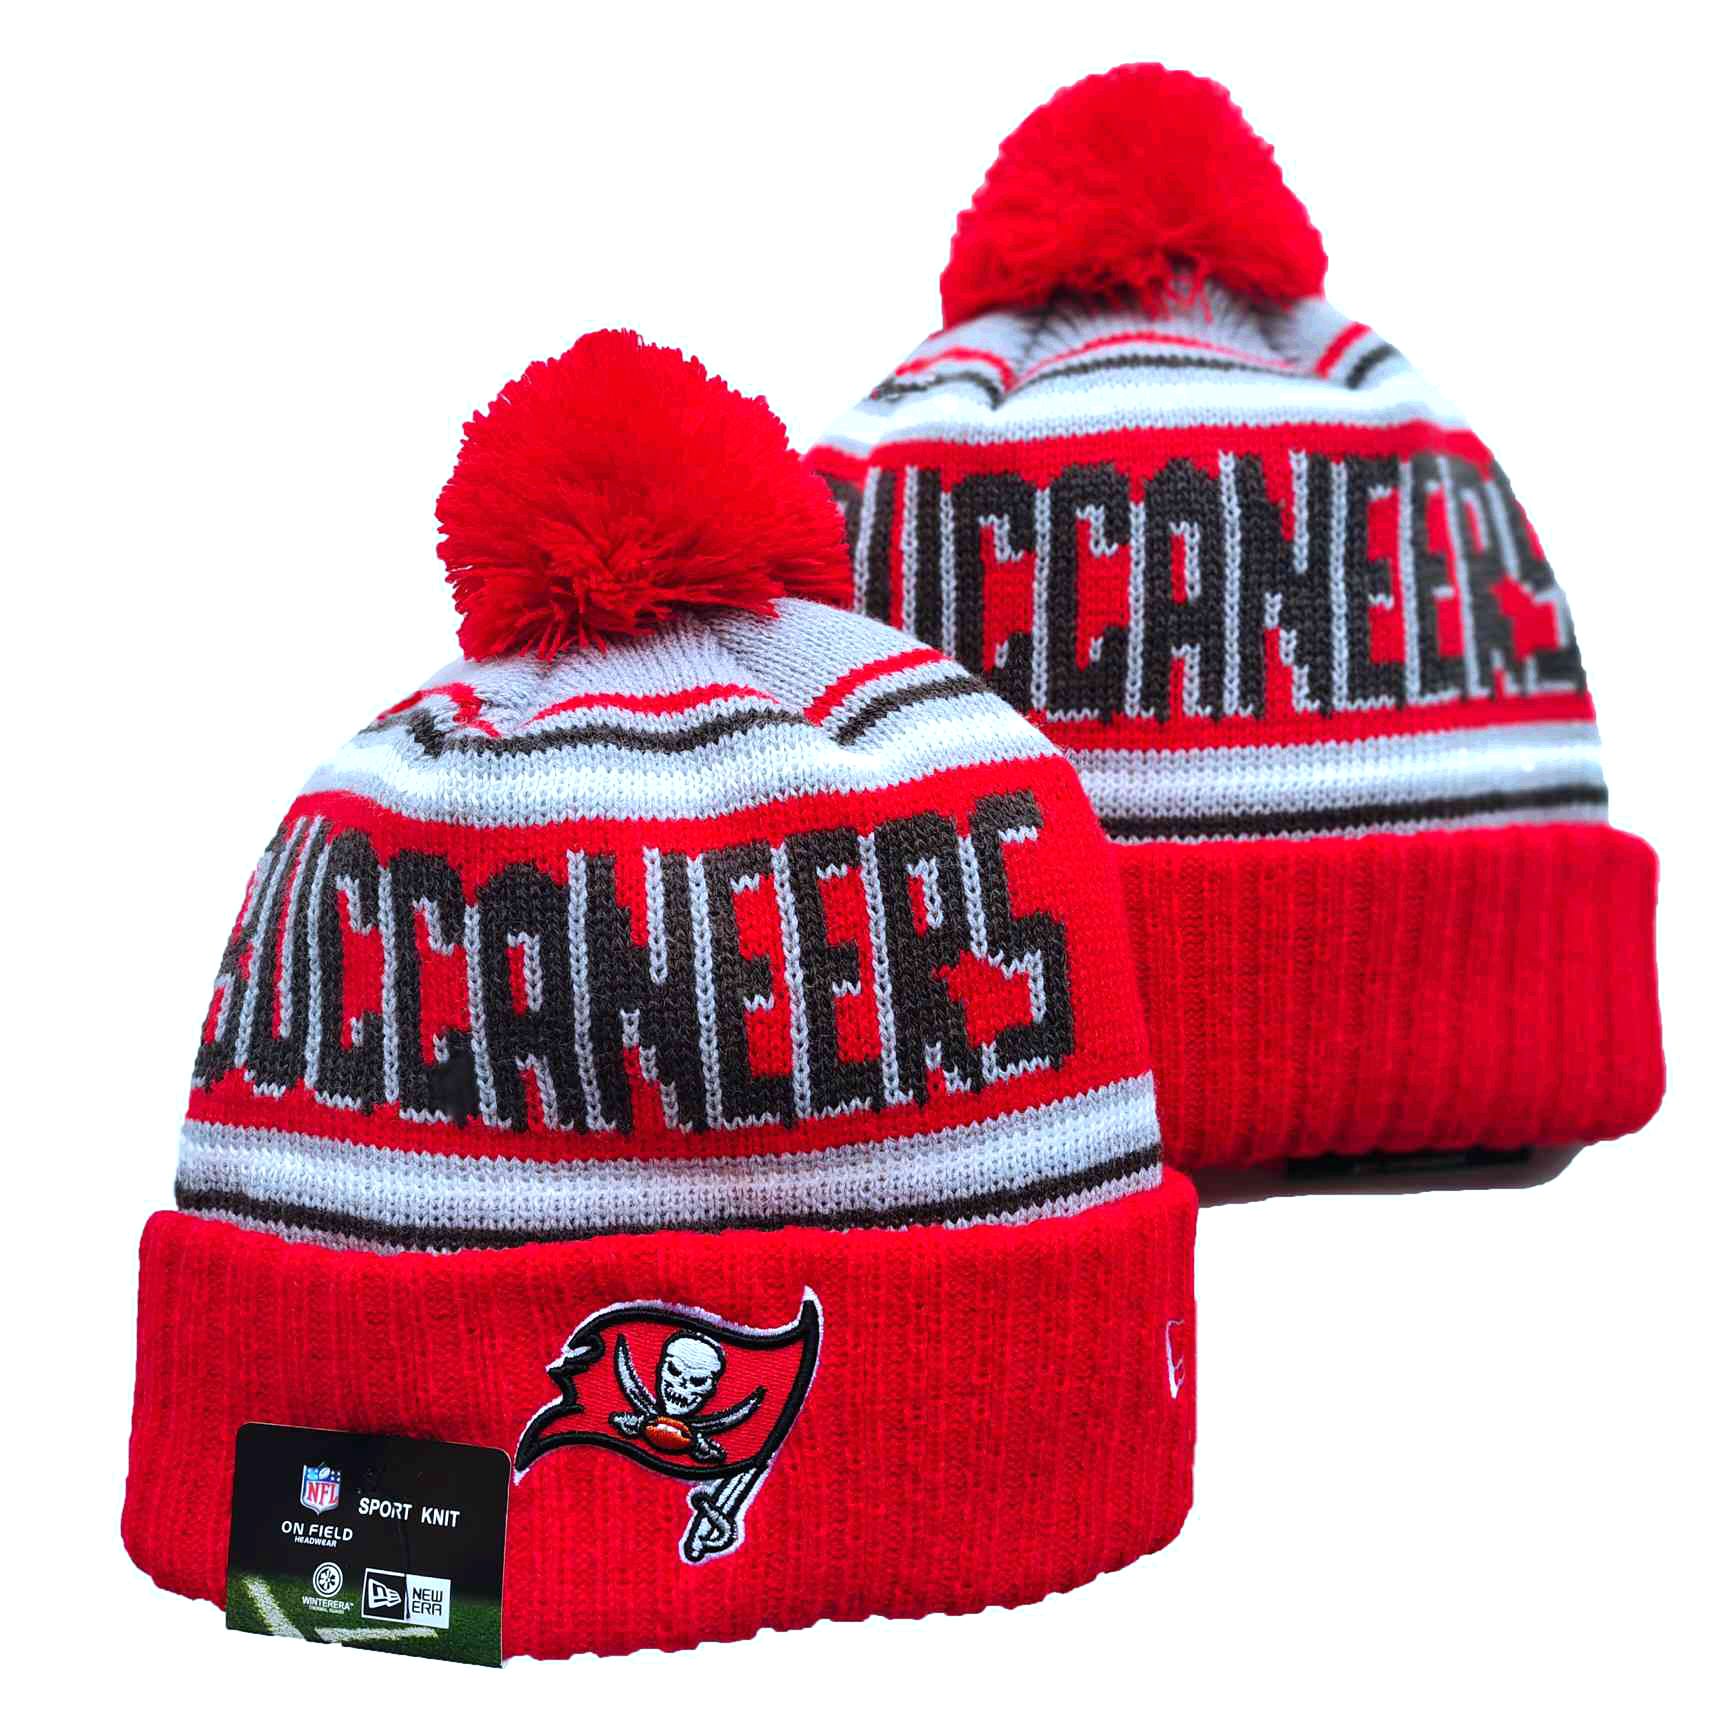 NFL Tampa Bay Buccaneers Beanies Knit Hats-YD1278